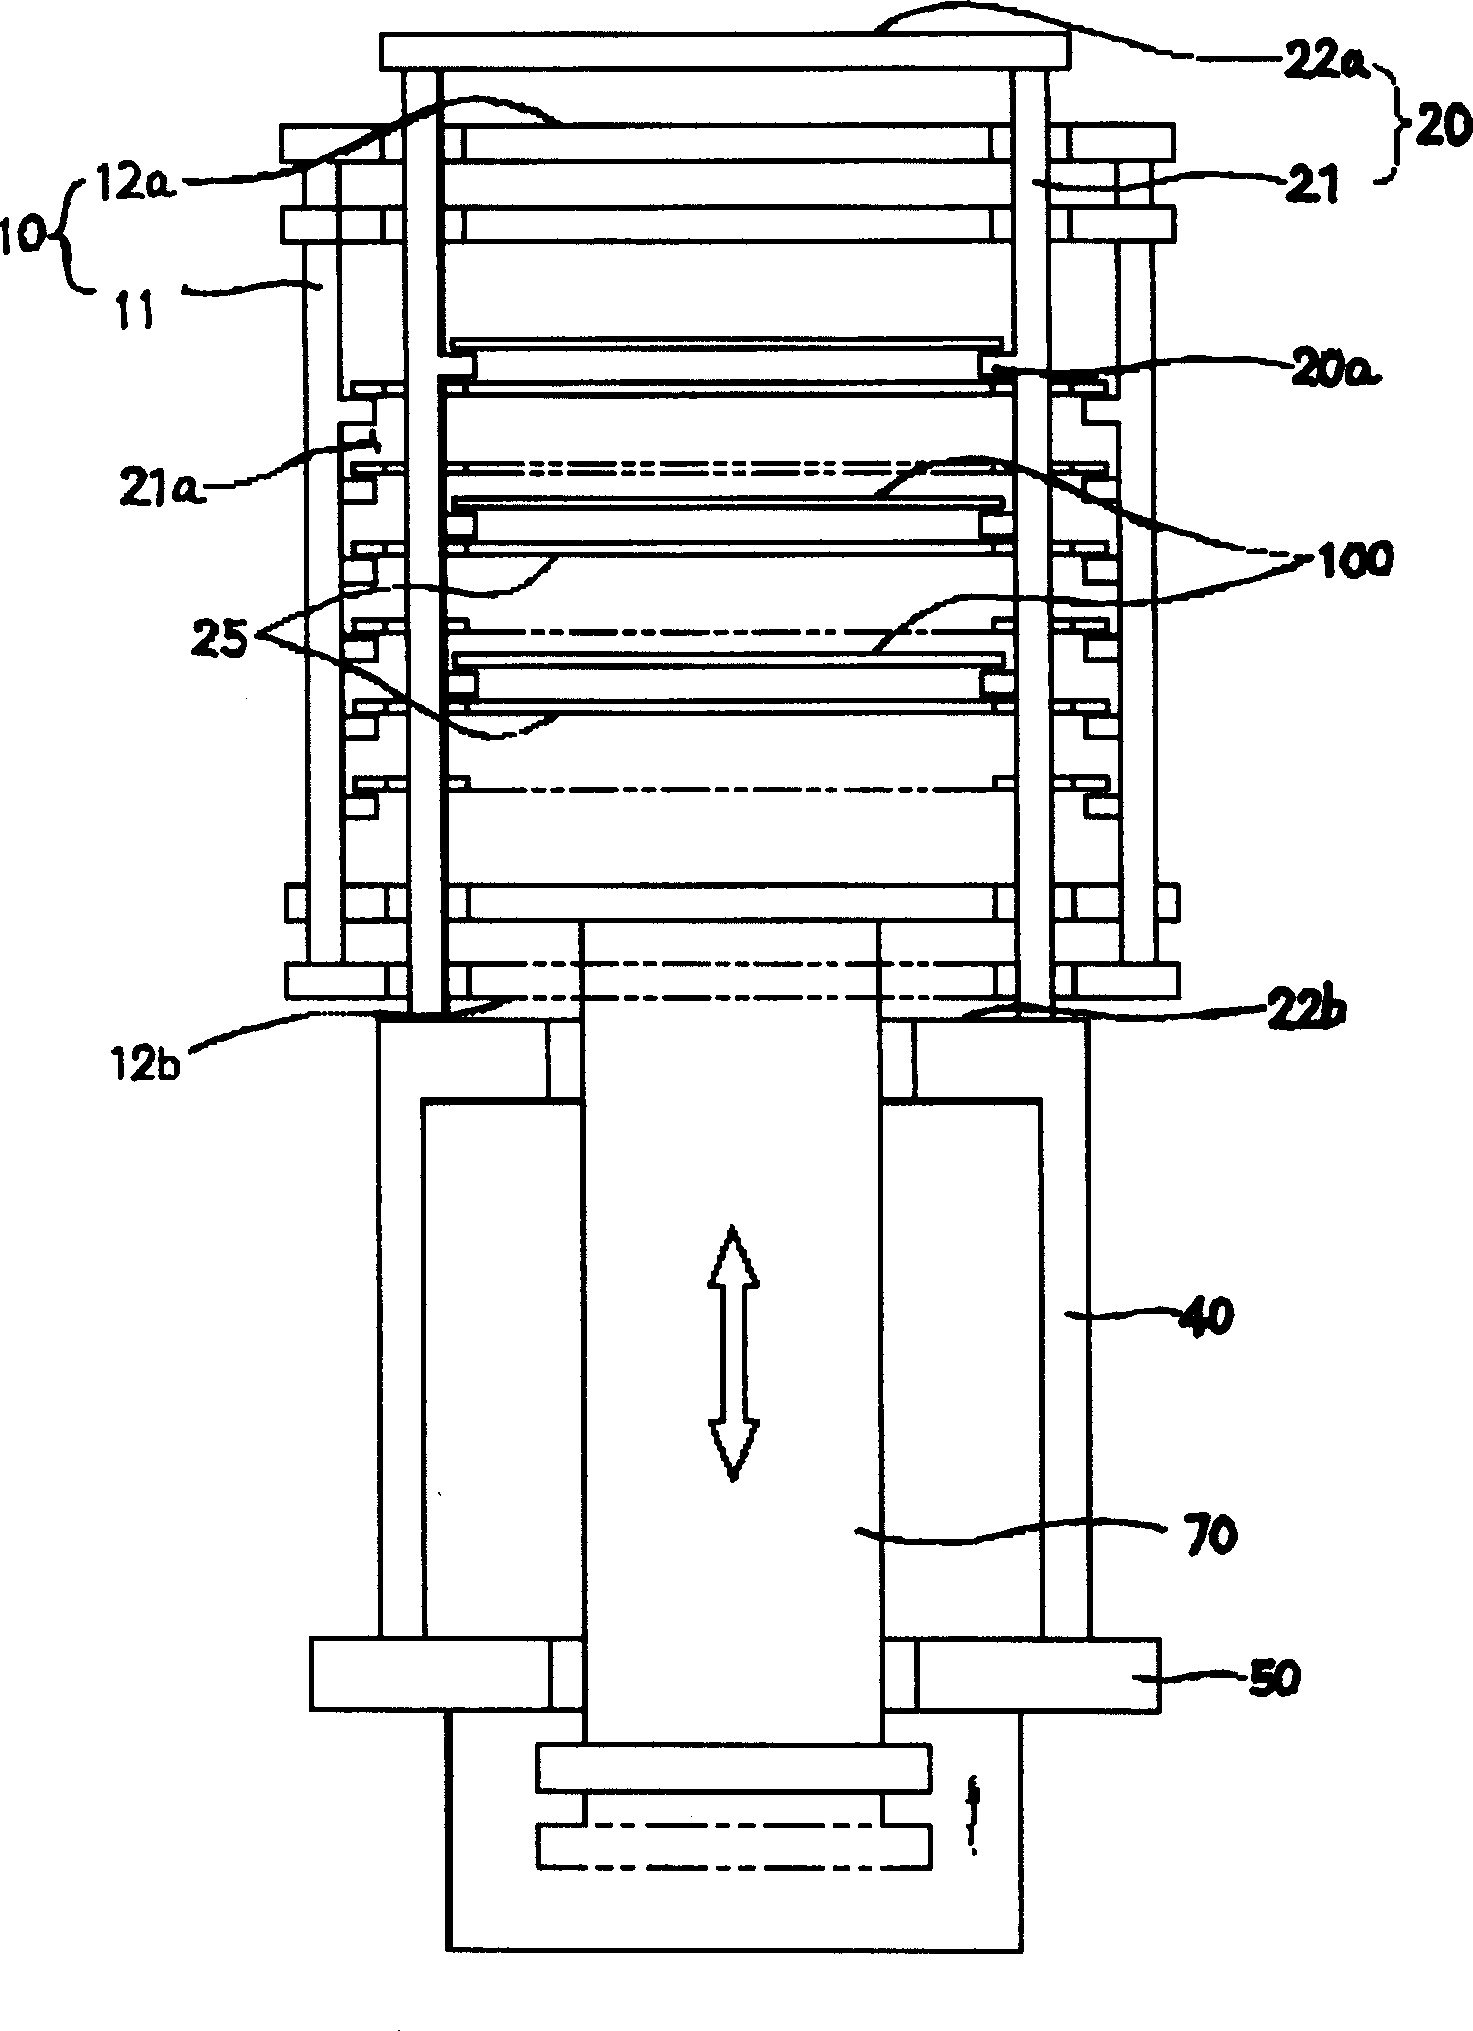 Semiconductor manufacturing system